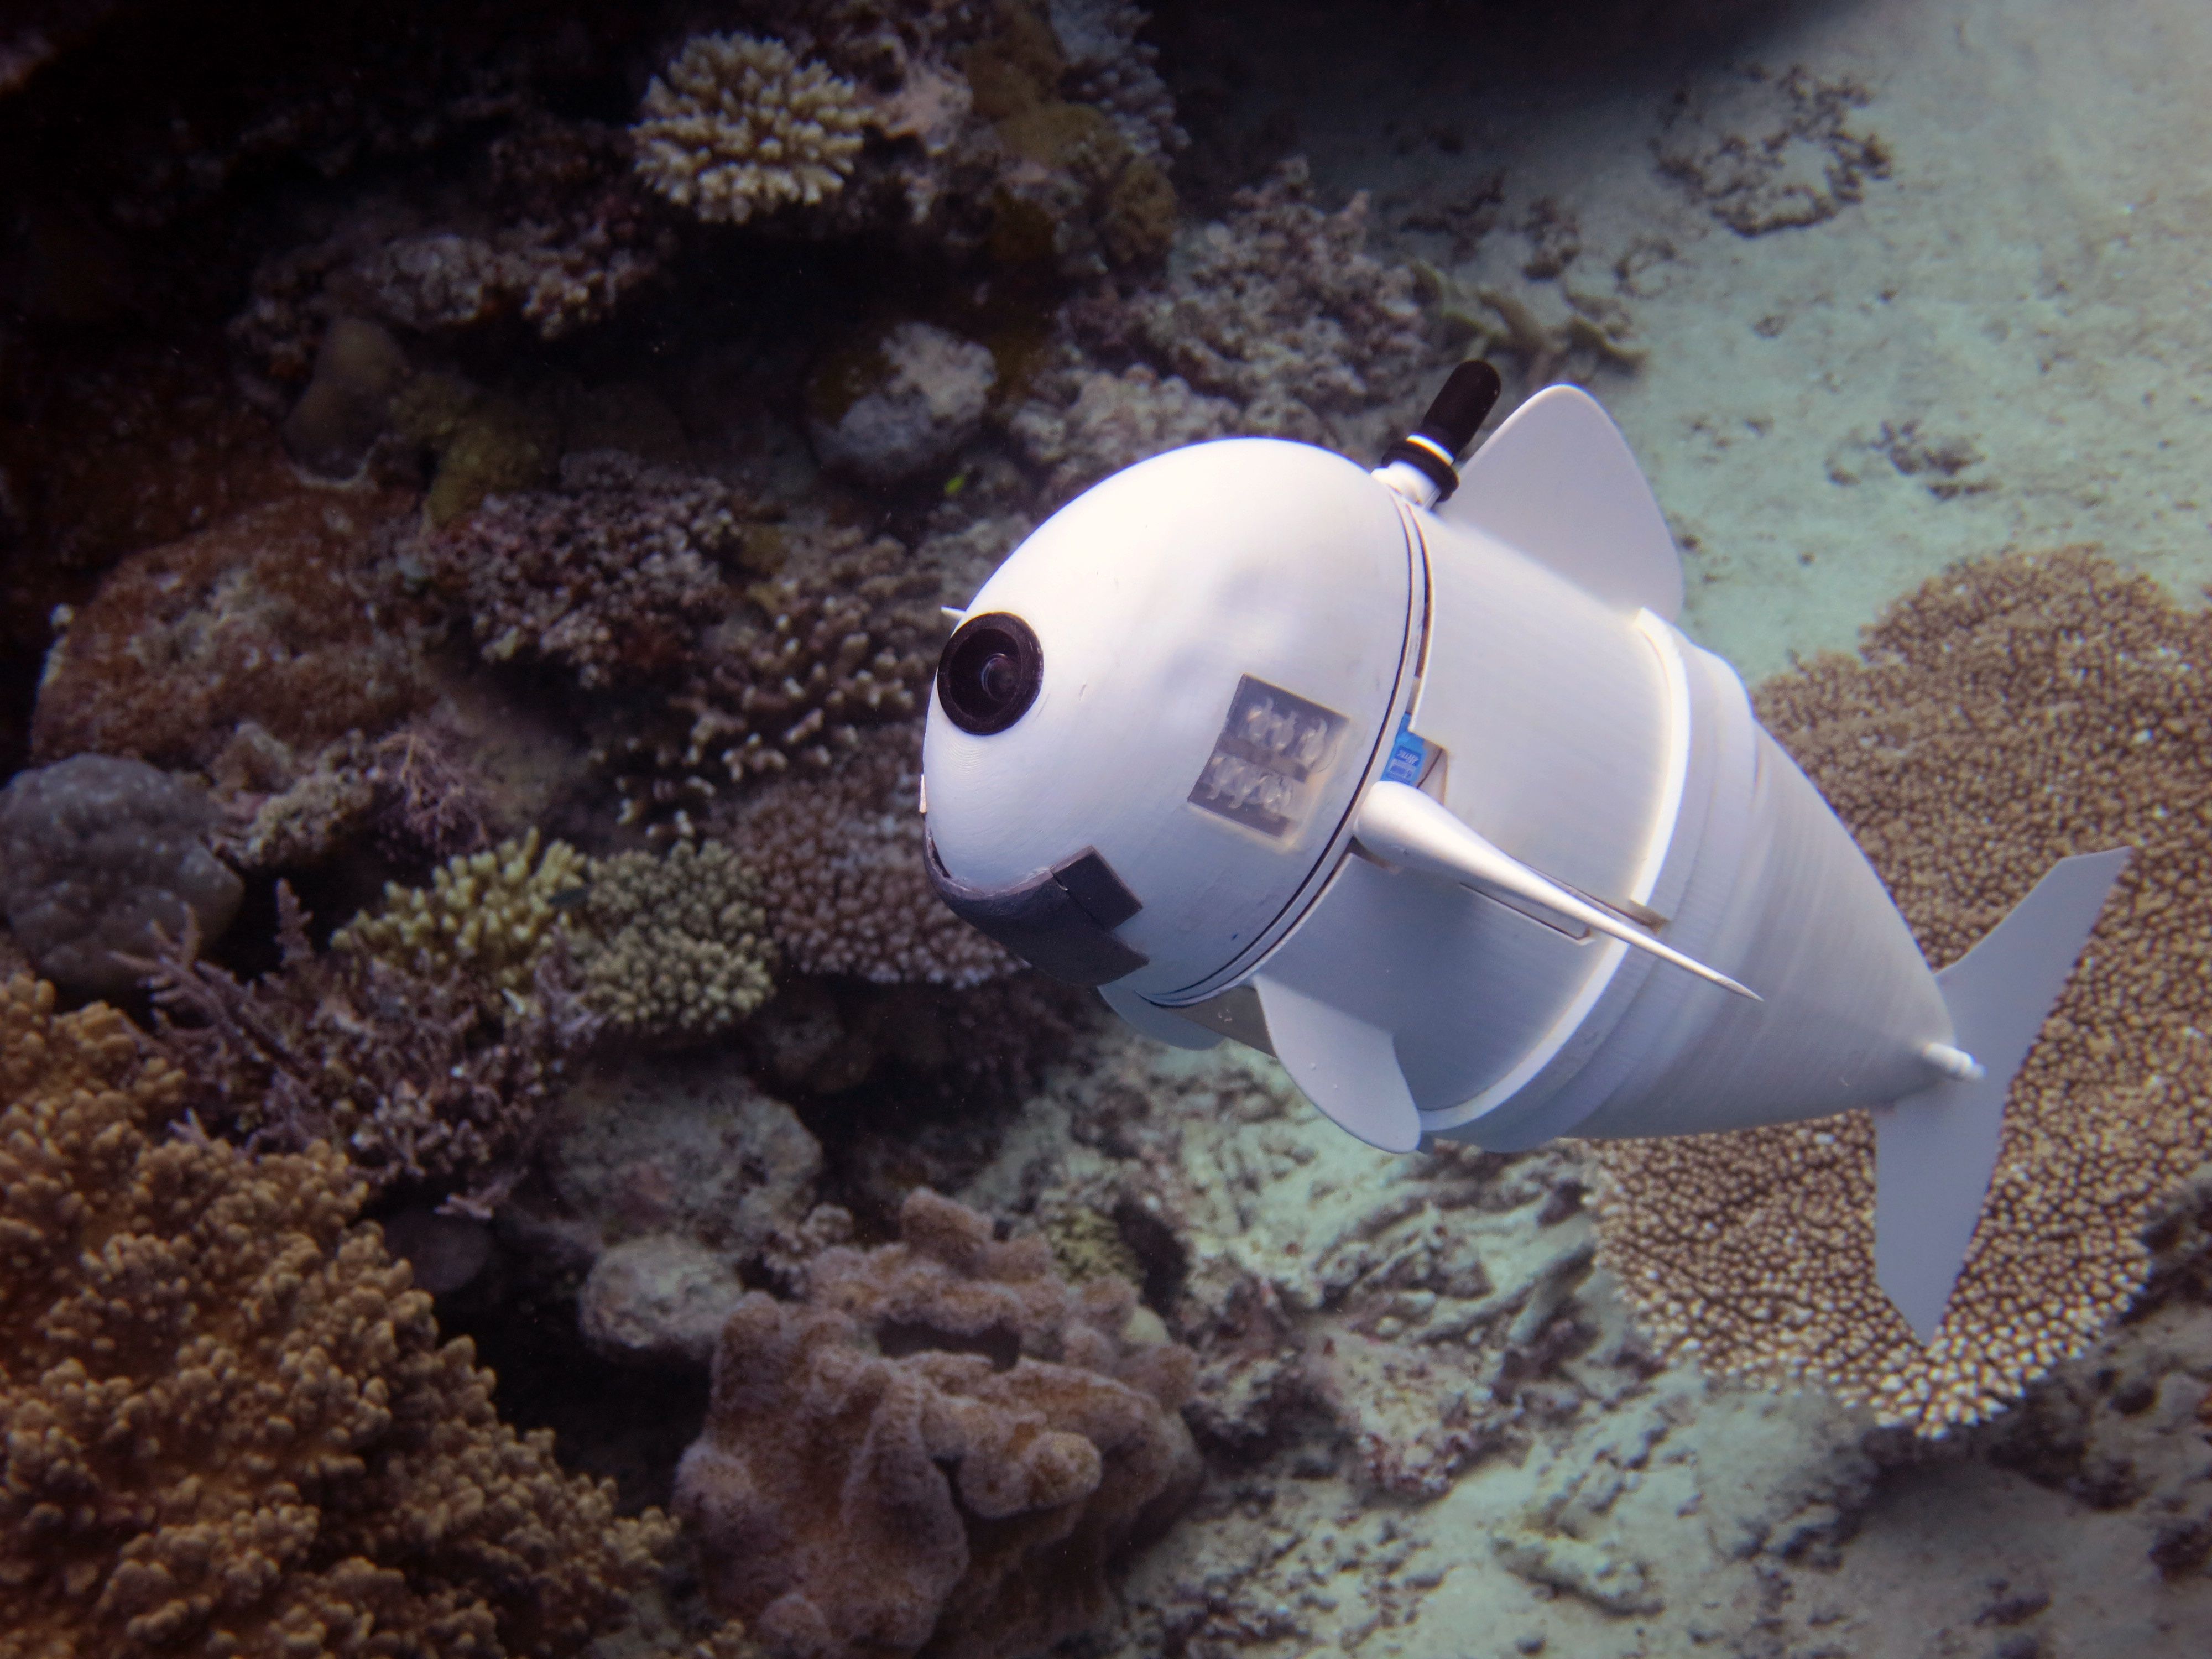 This Robotic Fish Is Powered by a 'Blood' Battery